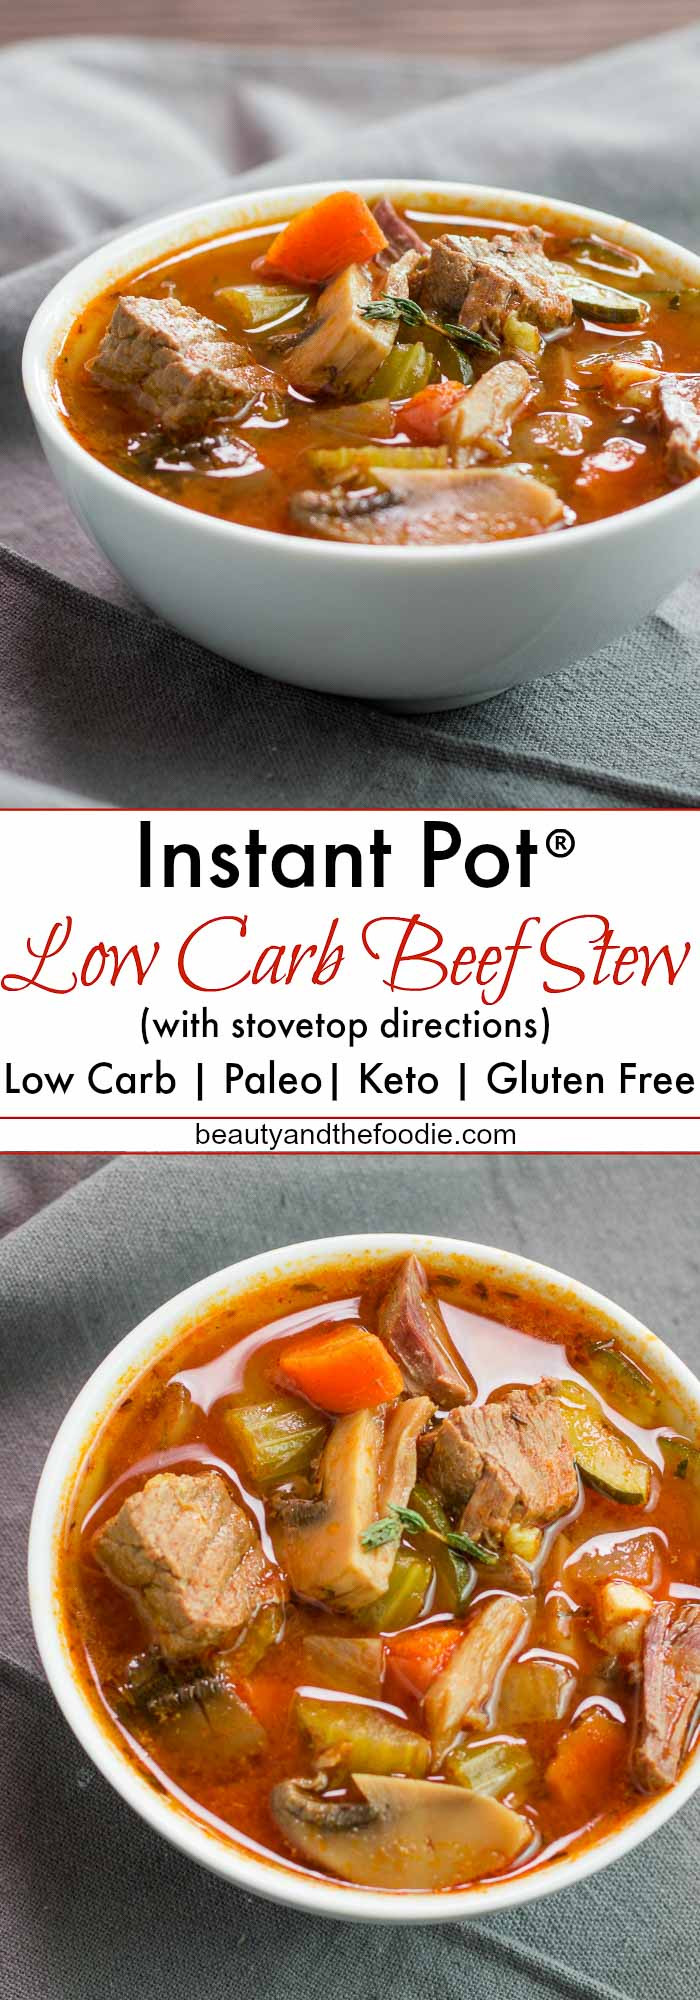 Keto Beef Stew Instant Pot
 Low Carb Instant Pot or Stovetop Hearty Beef Stew